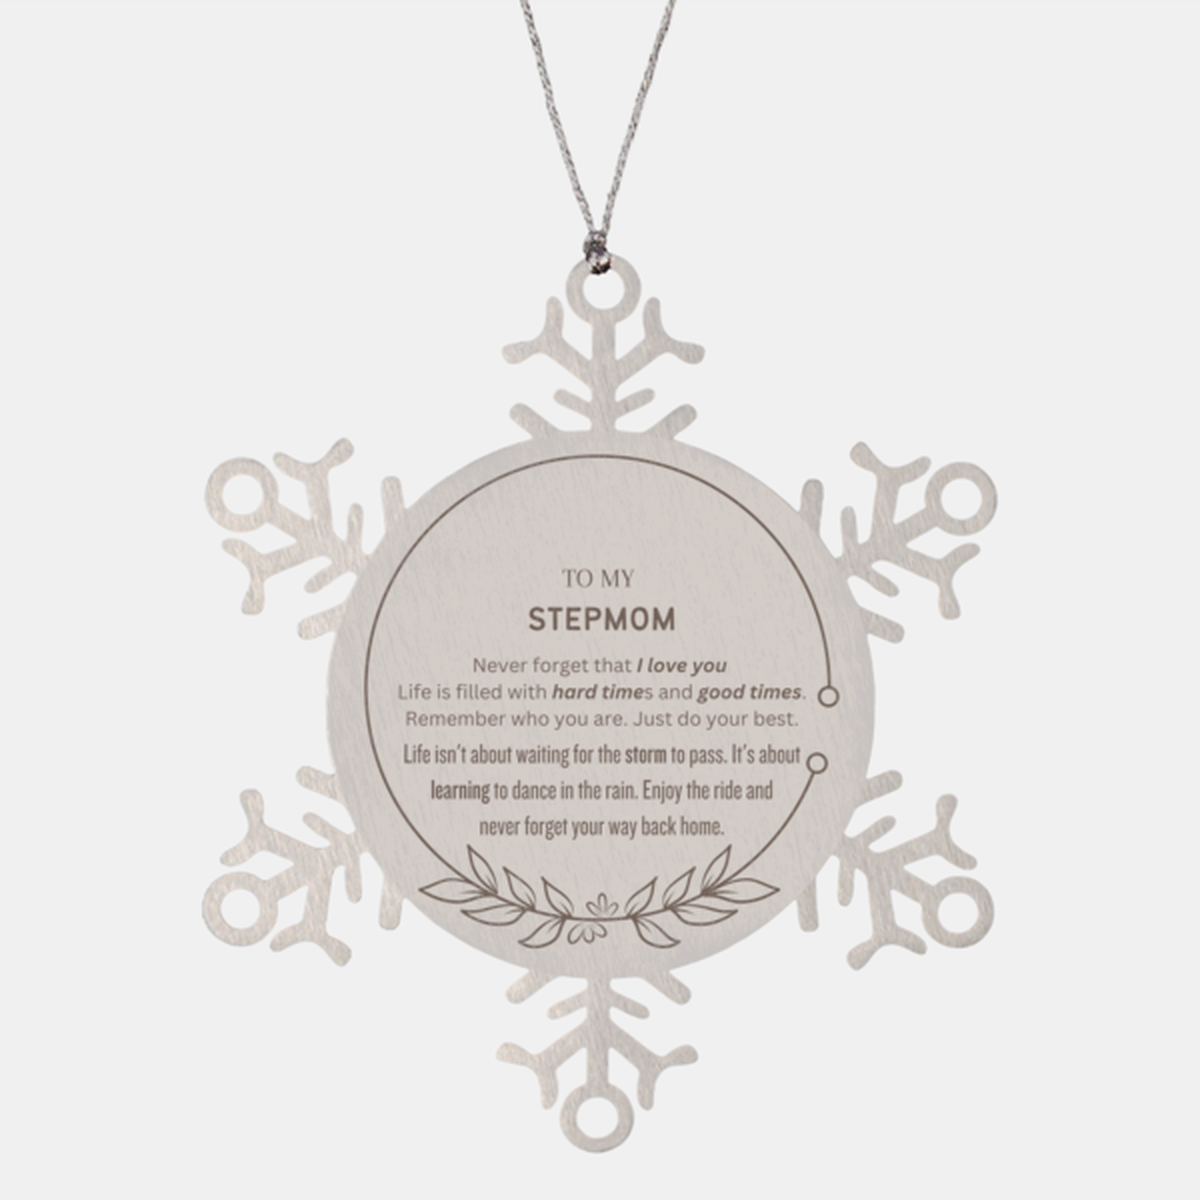 Christmas Stepmom Snowflake Ornament Gifts, To My Stepmom Thank You Gifts For Stepmom, Xmas Decorations Unique Gifts For Stepmom To My Stepmom Never forget that I love you life is filled with hard times and good times. Remember who you are. Just do your b